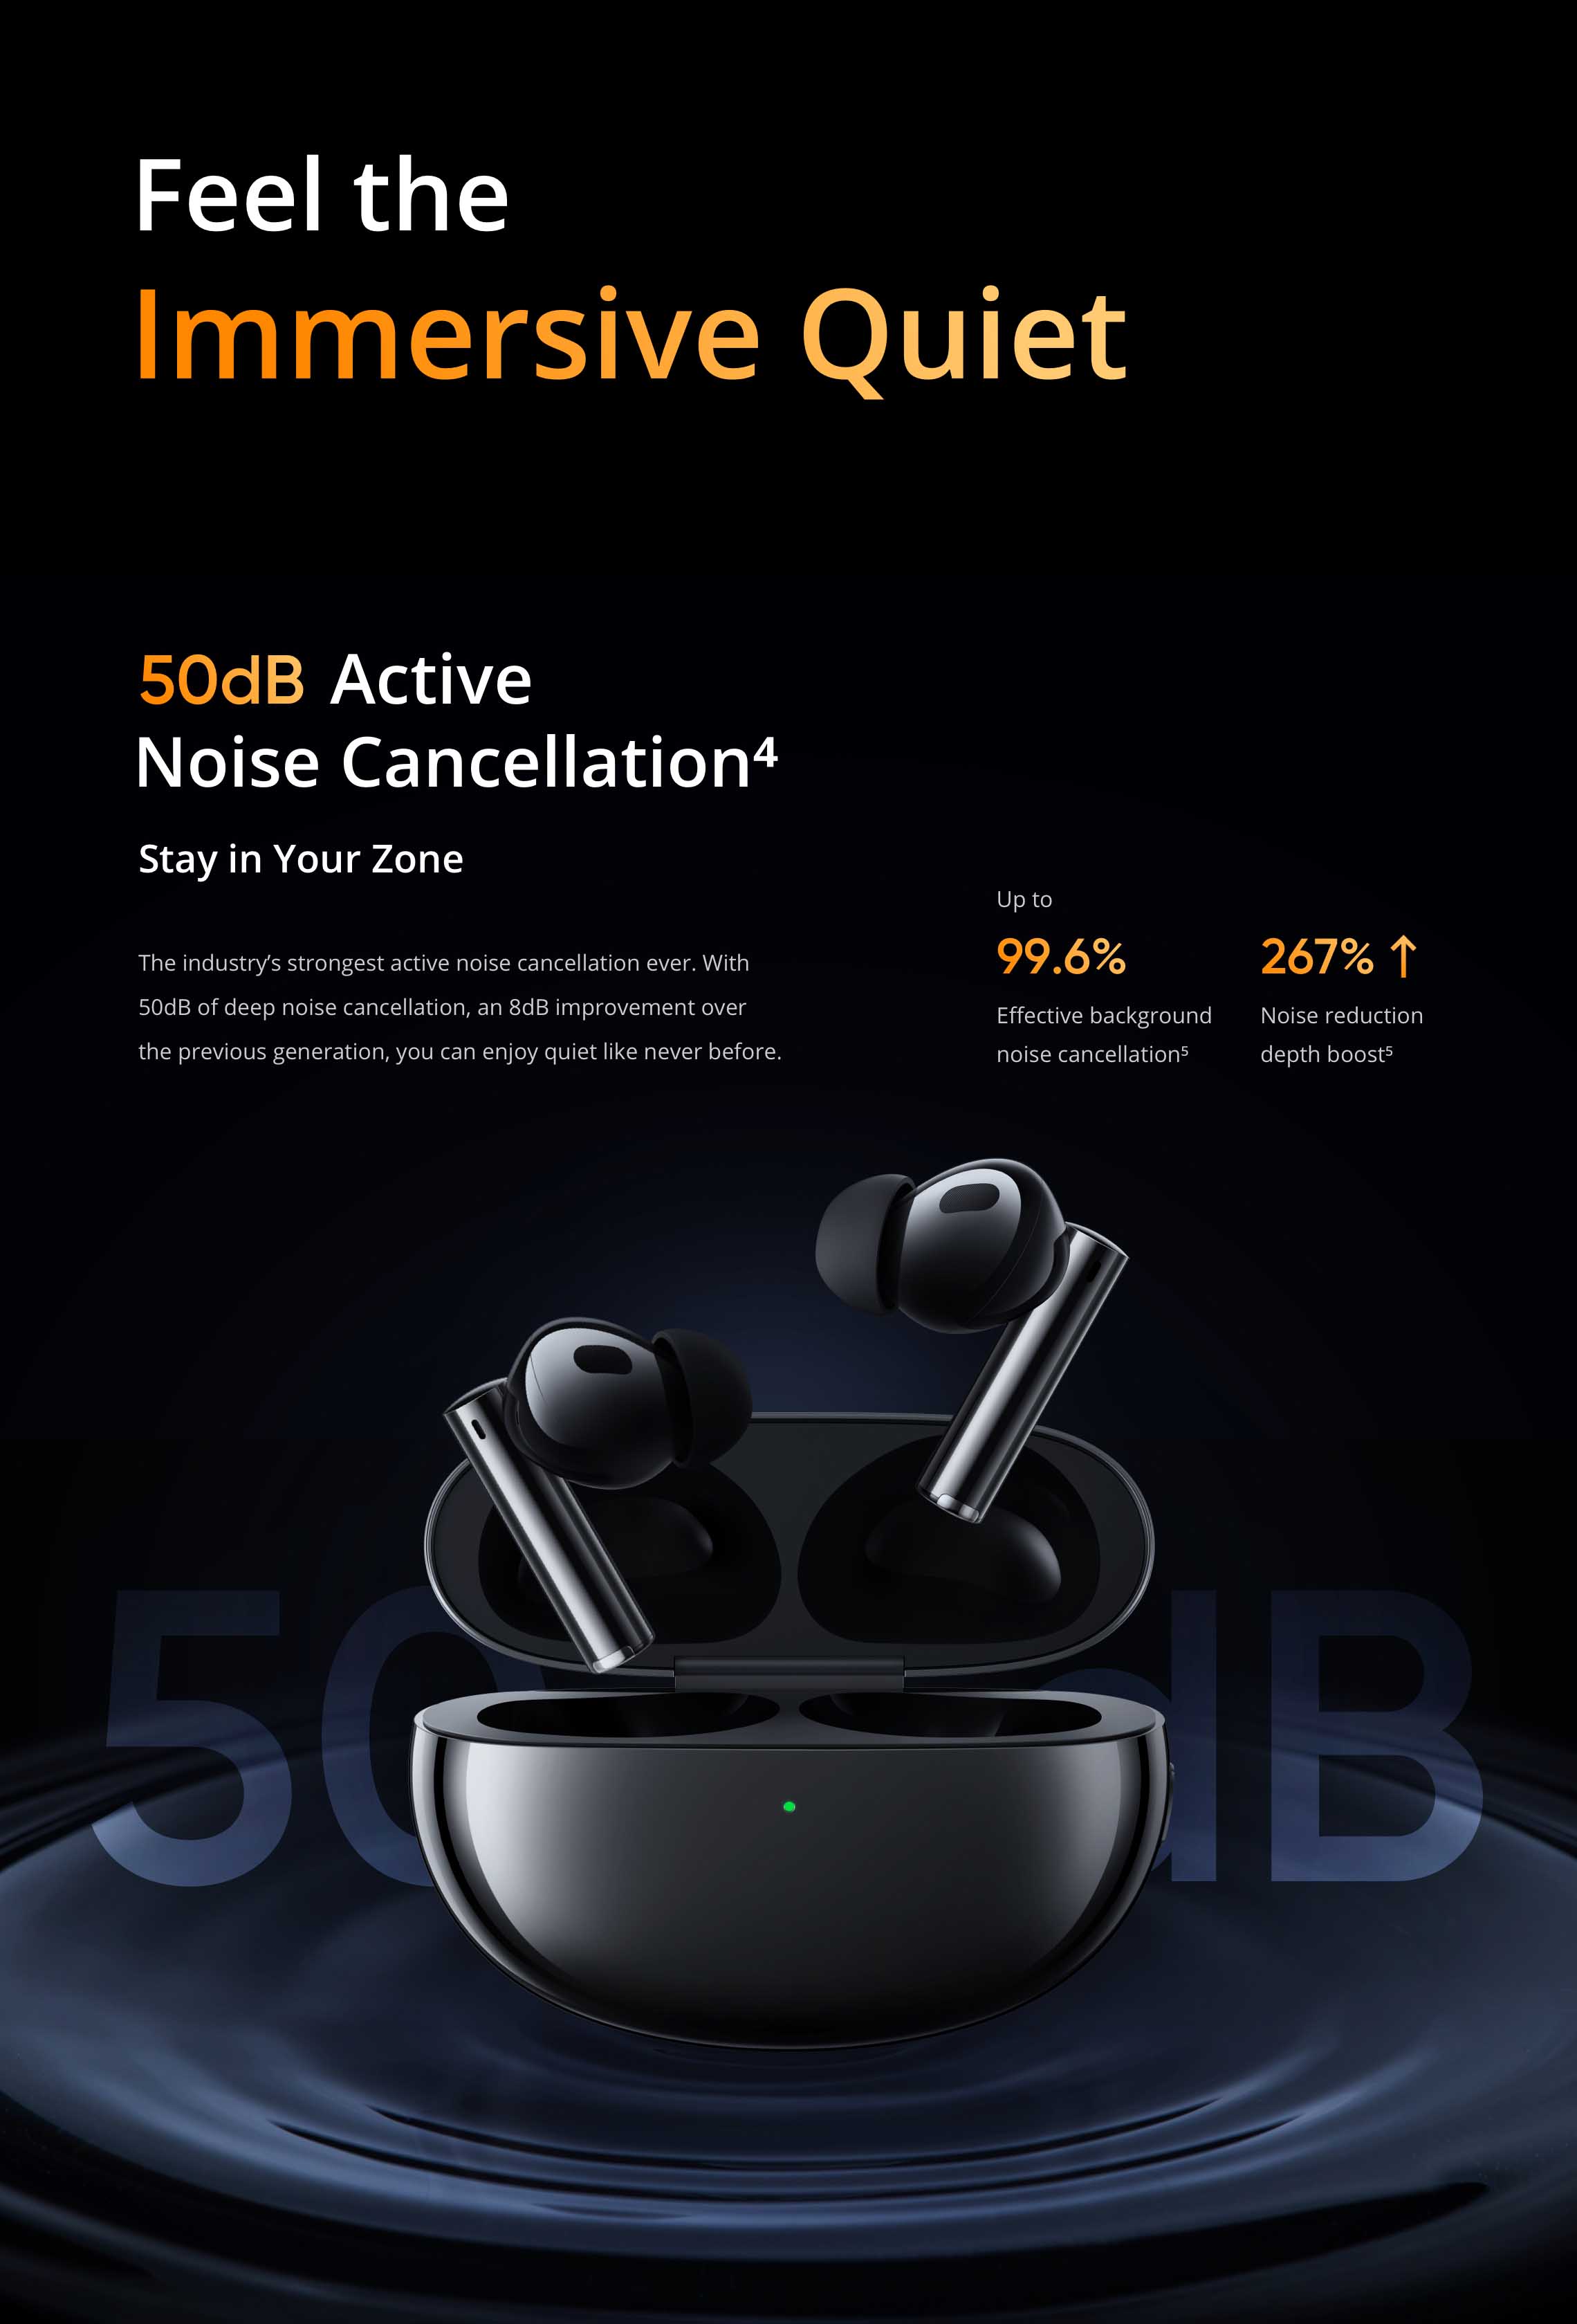 Global Realme Buds Air 5 Pro TWS Wireless Headphones 50dB Active Noise  Reduction LDAC Bluetooth 5.3 IPX5 Waterproof Headset